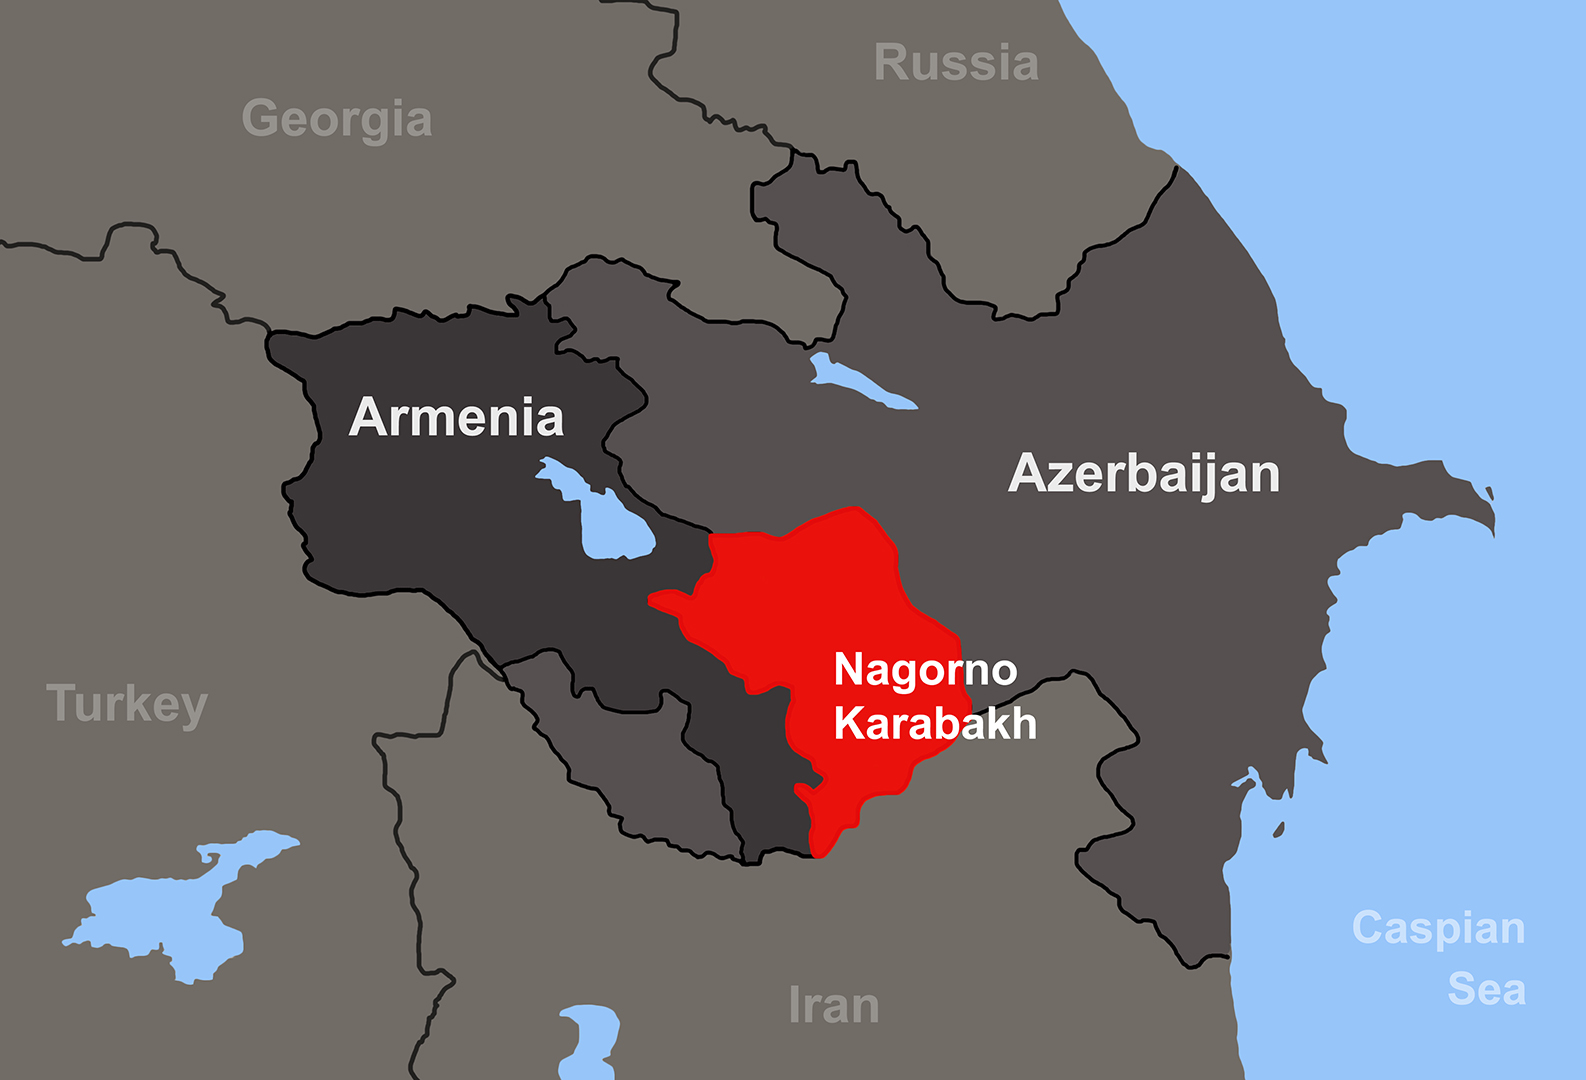 In NagornoKarabakh, the Cycle of Ethnic Cleansing Continues Pulitzer